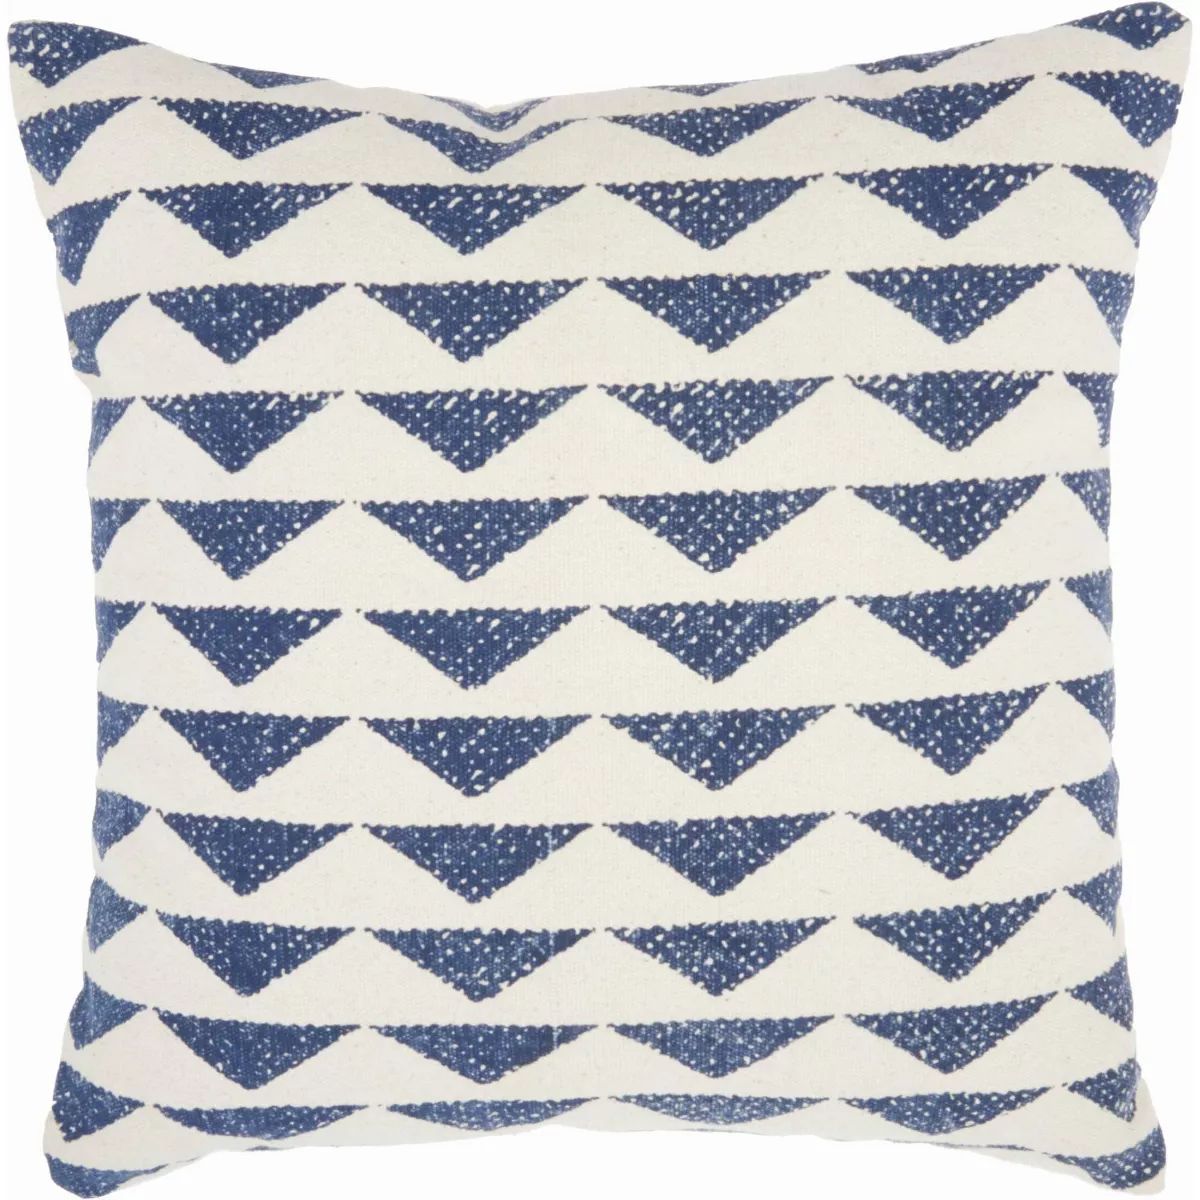 20"x20" Oversize Life Styles Printed Triangles Square Throw Pillow Navy - Mina Victory | Target